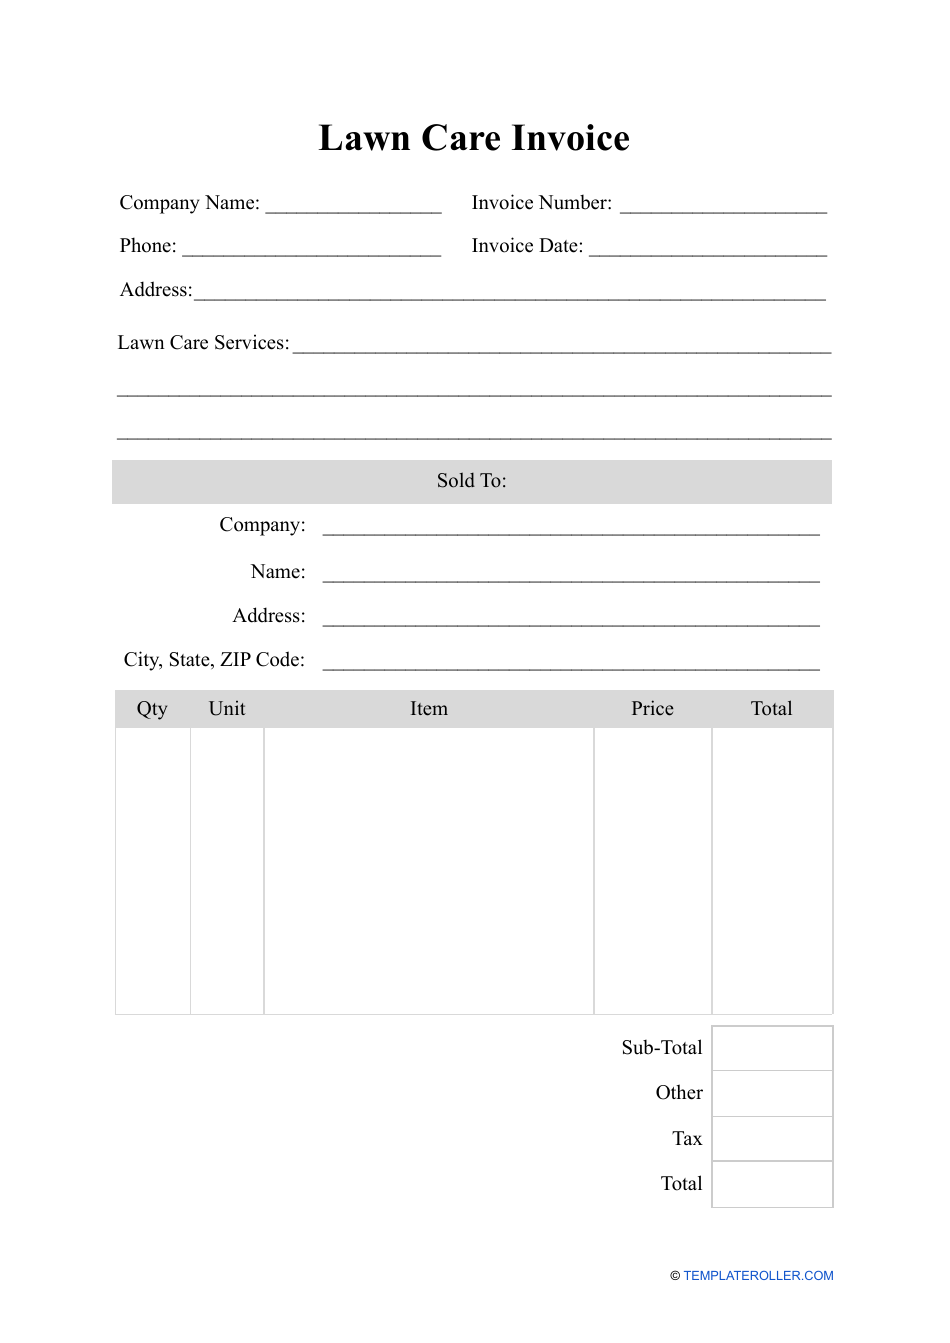 lawn care invoice template download printable pdf templateroller